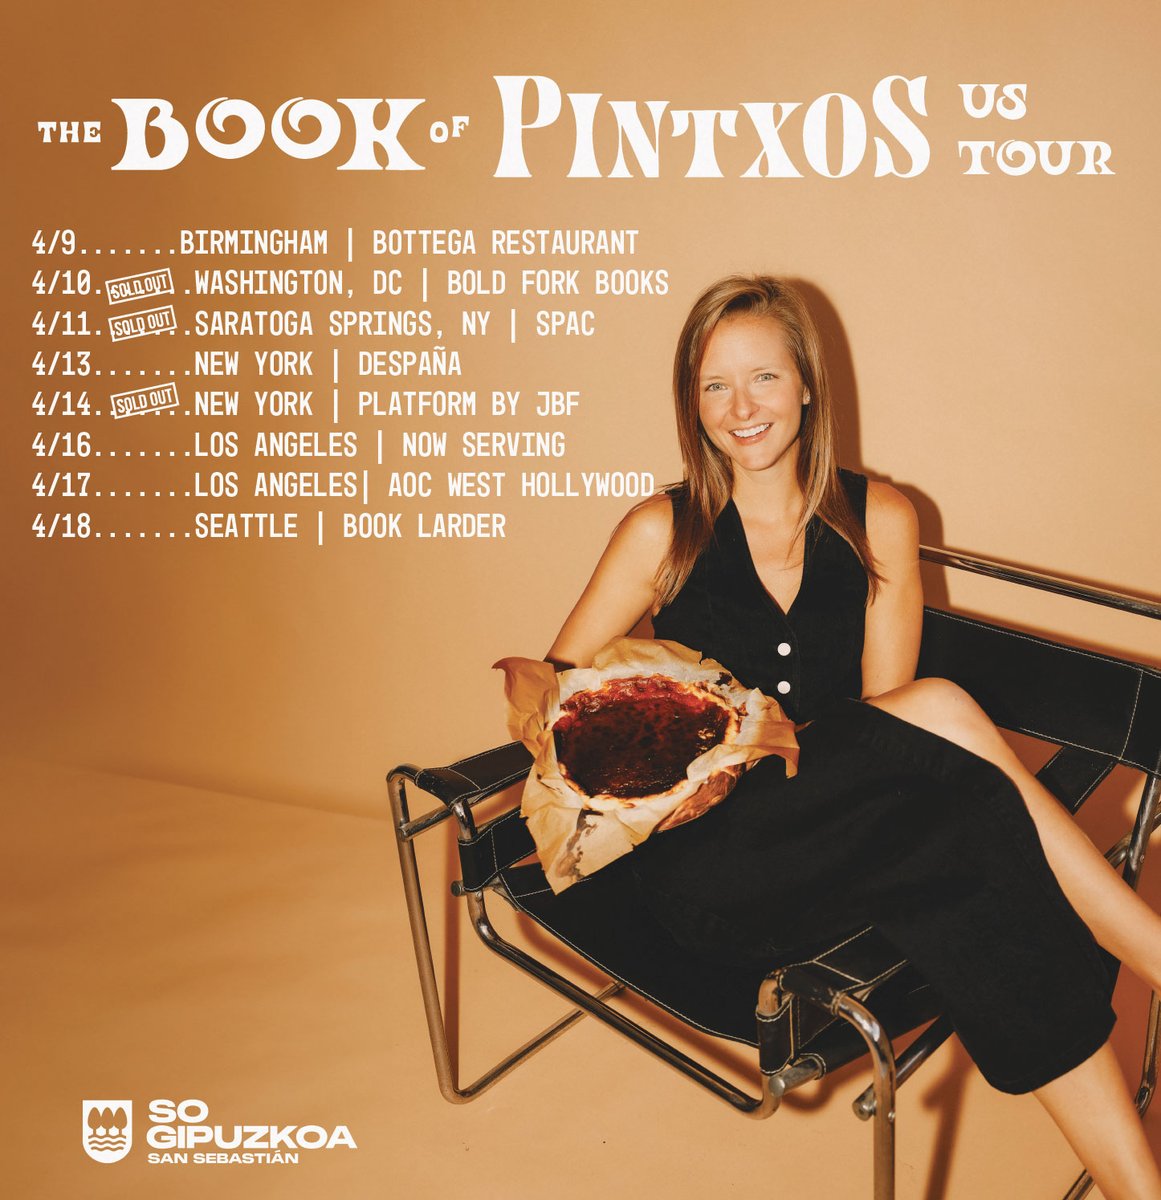 THE BOOK OF PINTXO US TOUR 🍢 Come out and see me, people! Thanks to @GipuzkoaTurismo for supporting. Tickets here —> travelcookeat.com/basque-country